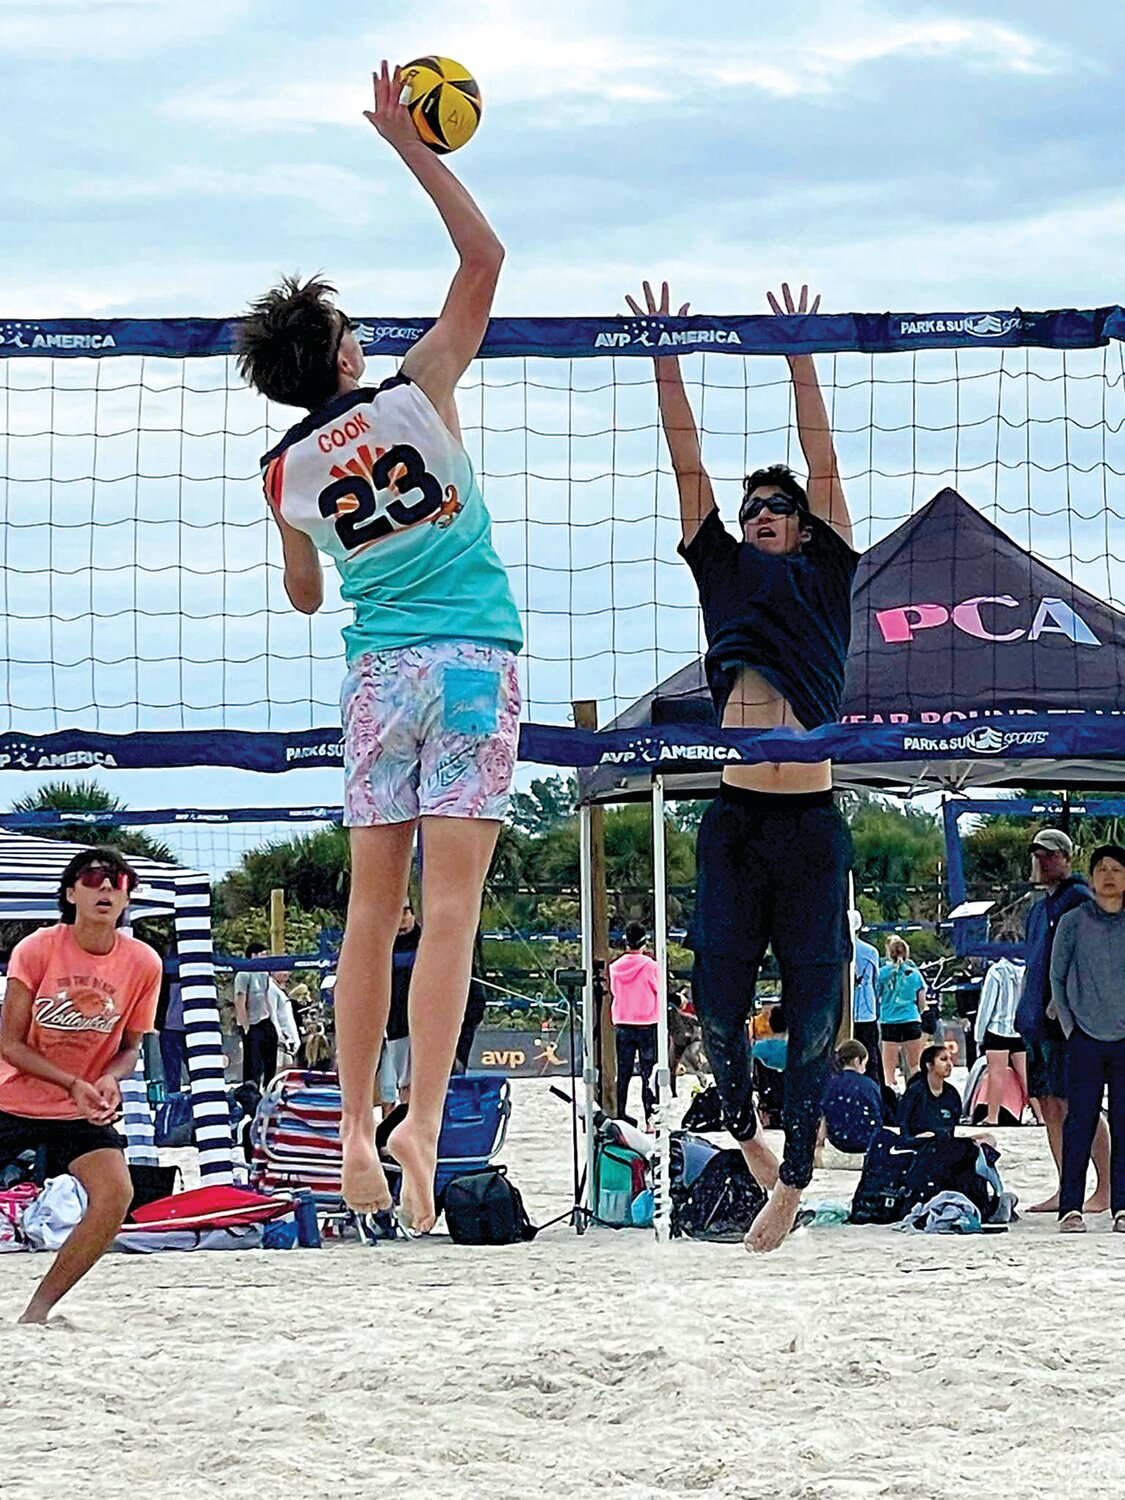 SandYard Youth Beach Volleyball player Joshua James Cook, a student at Council Rock South, competes in the AVP East Coast Championships.